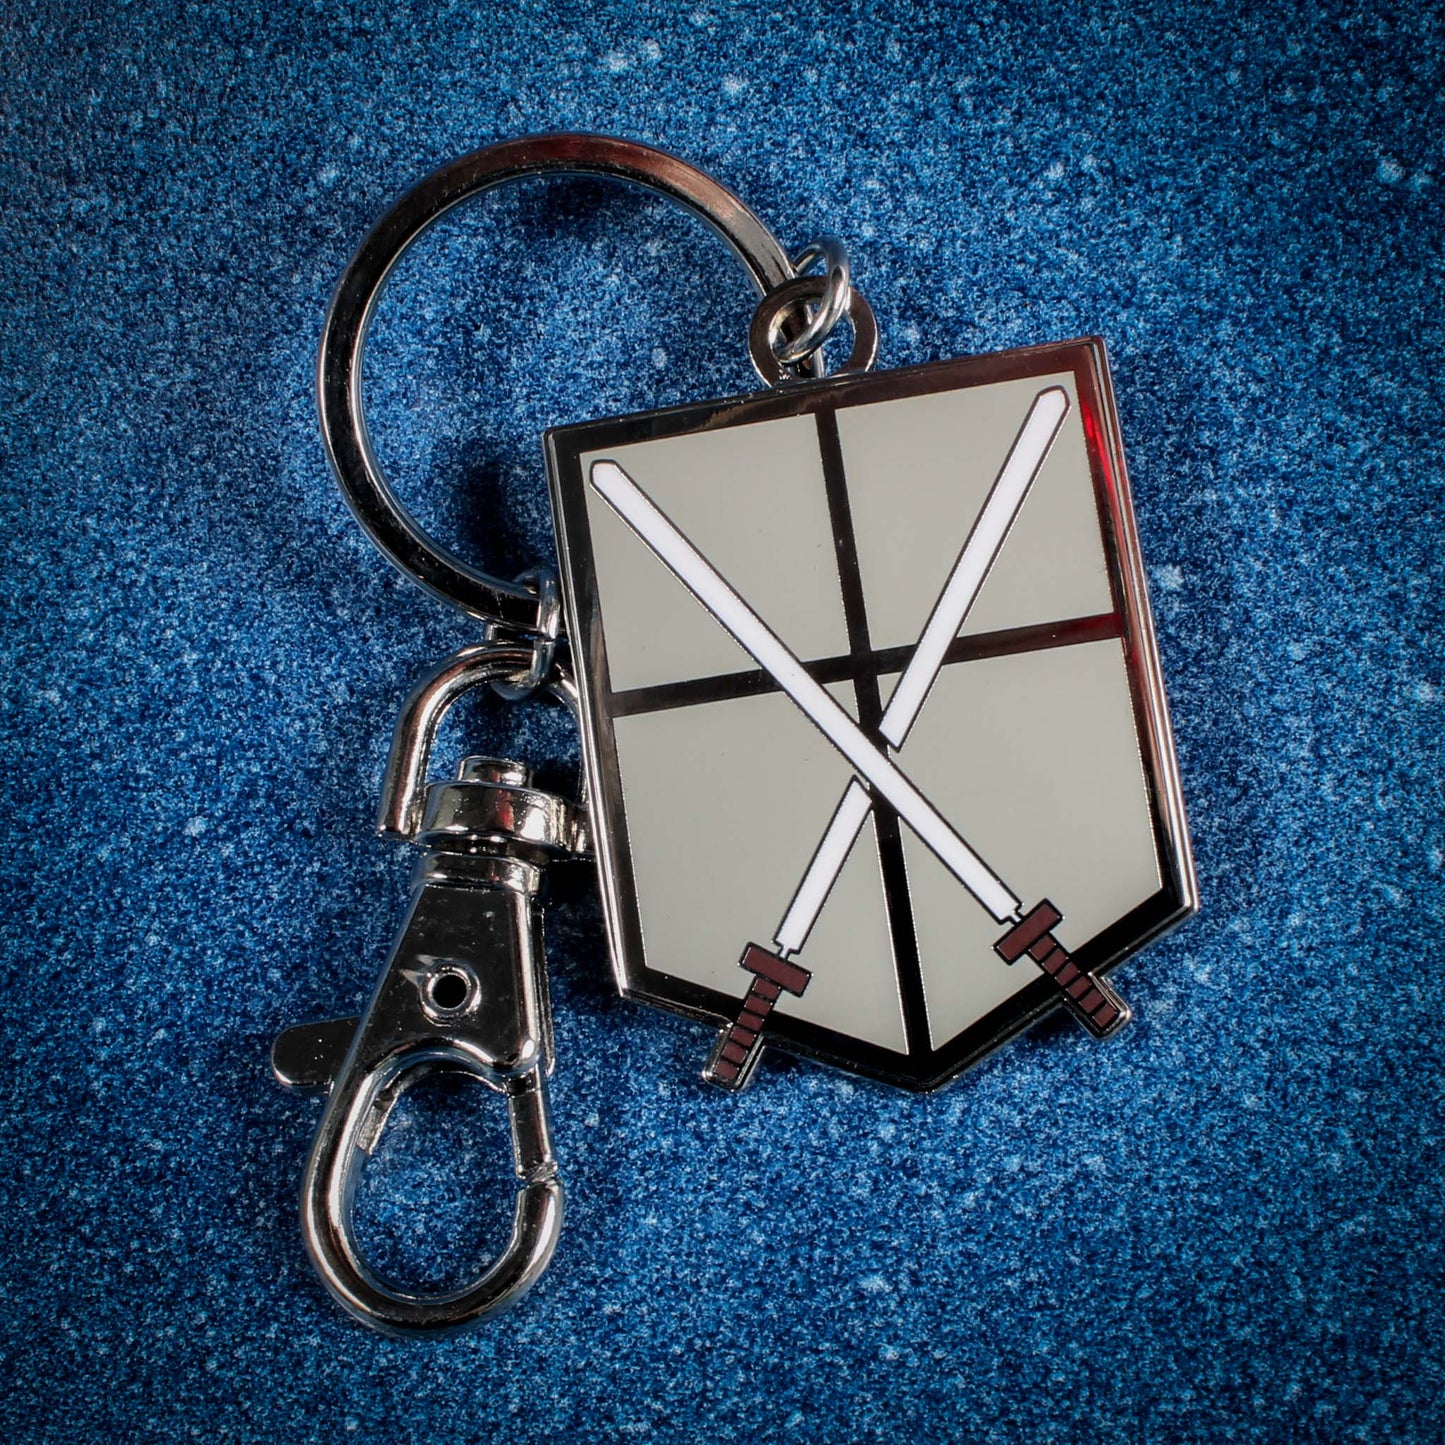 104th Trainees Squad (Attack on Titan) Keychain no card